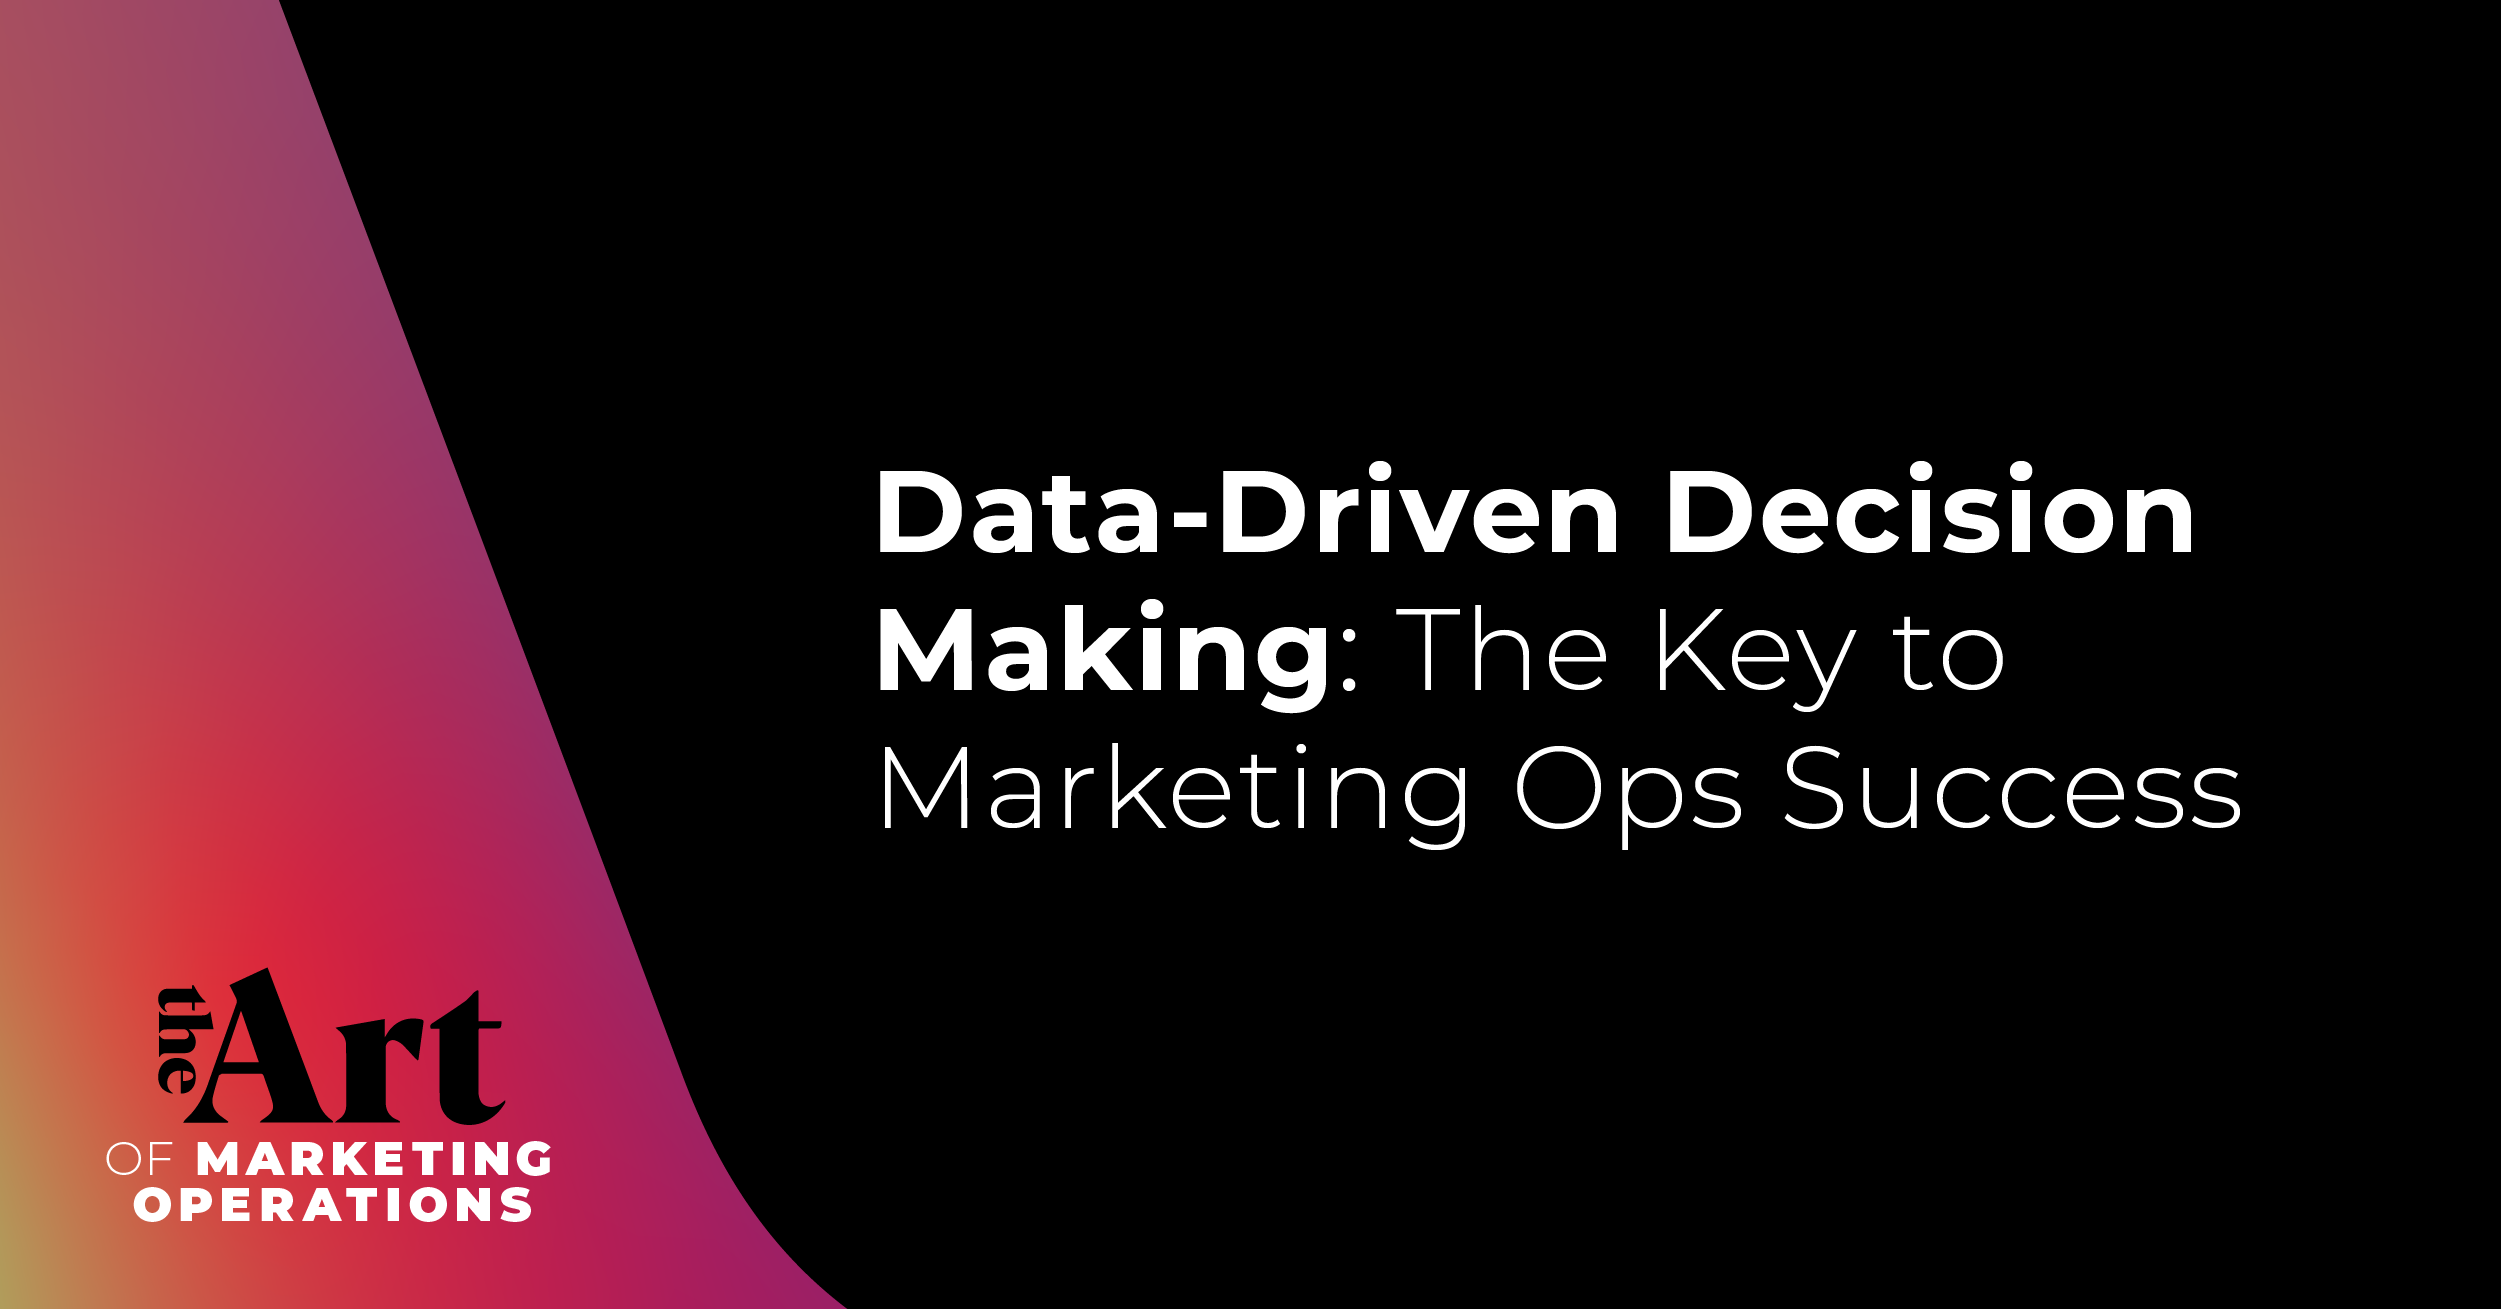 Data- Driven Decision Making: The Key to Marketing Ops Success